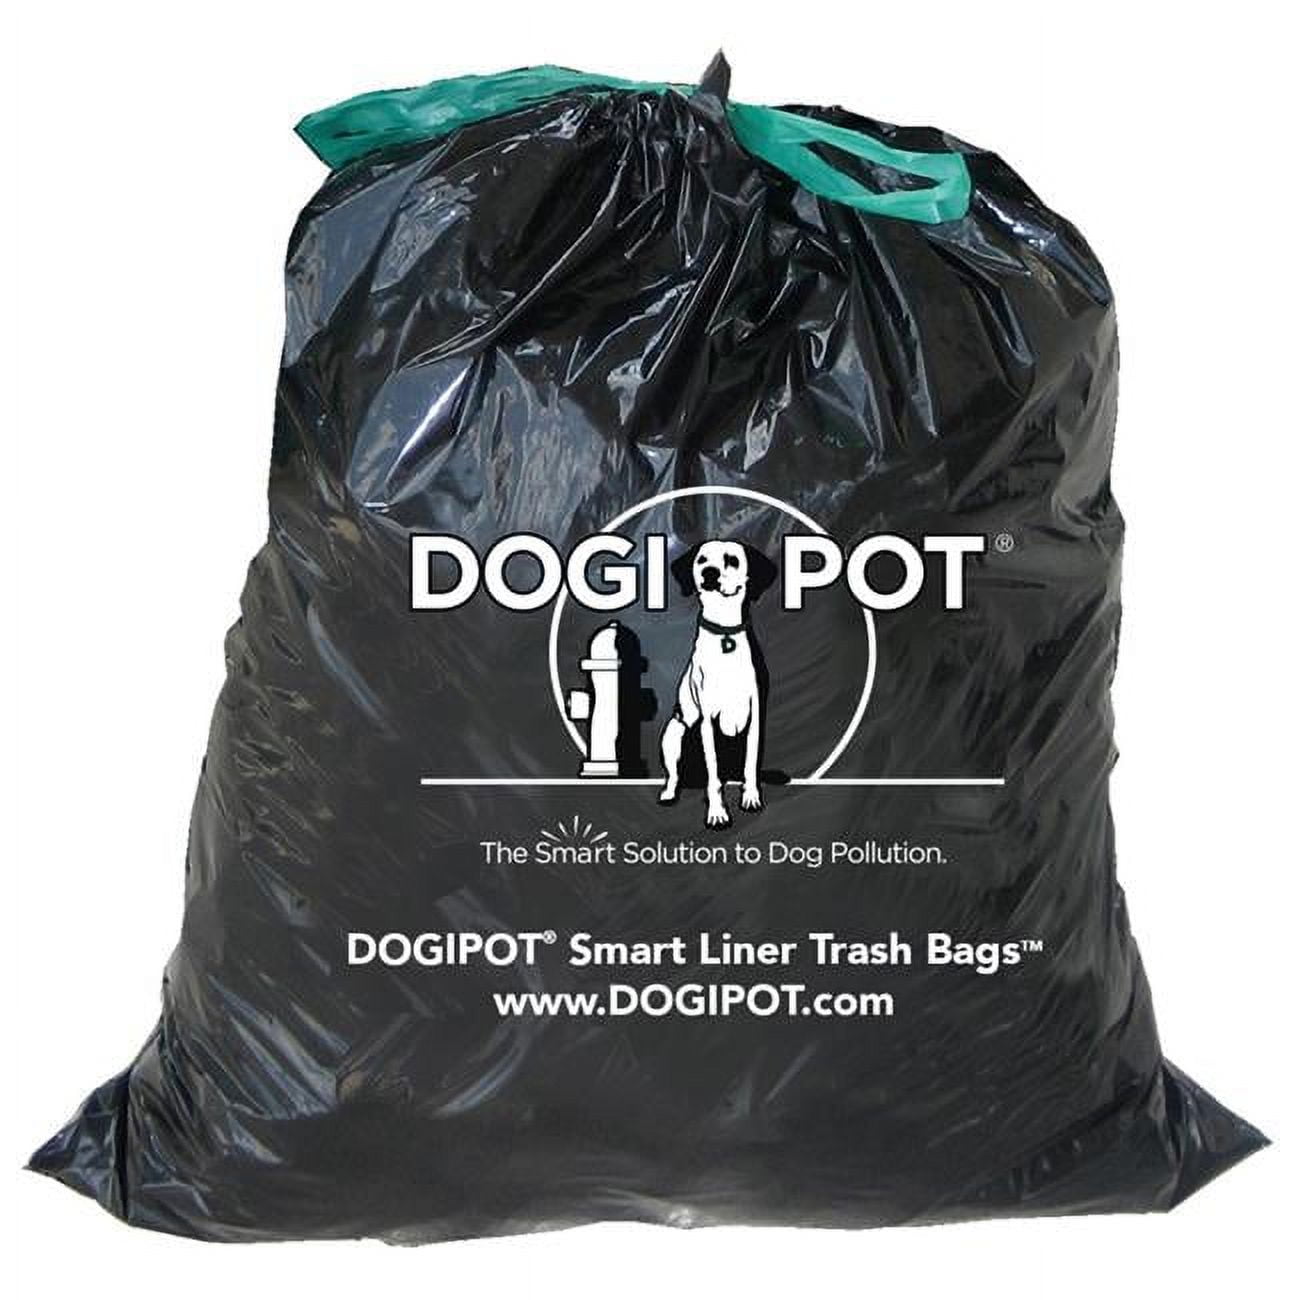 Picture of Dogipot 1404-4 Liner trash bags 50 count pack of 4